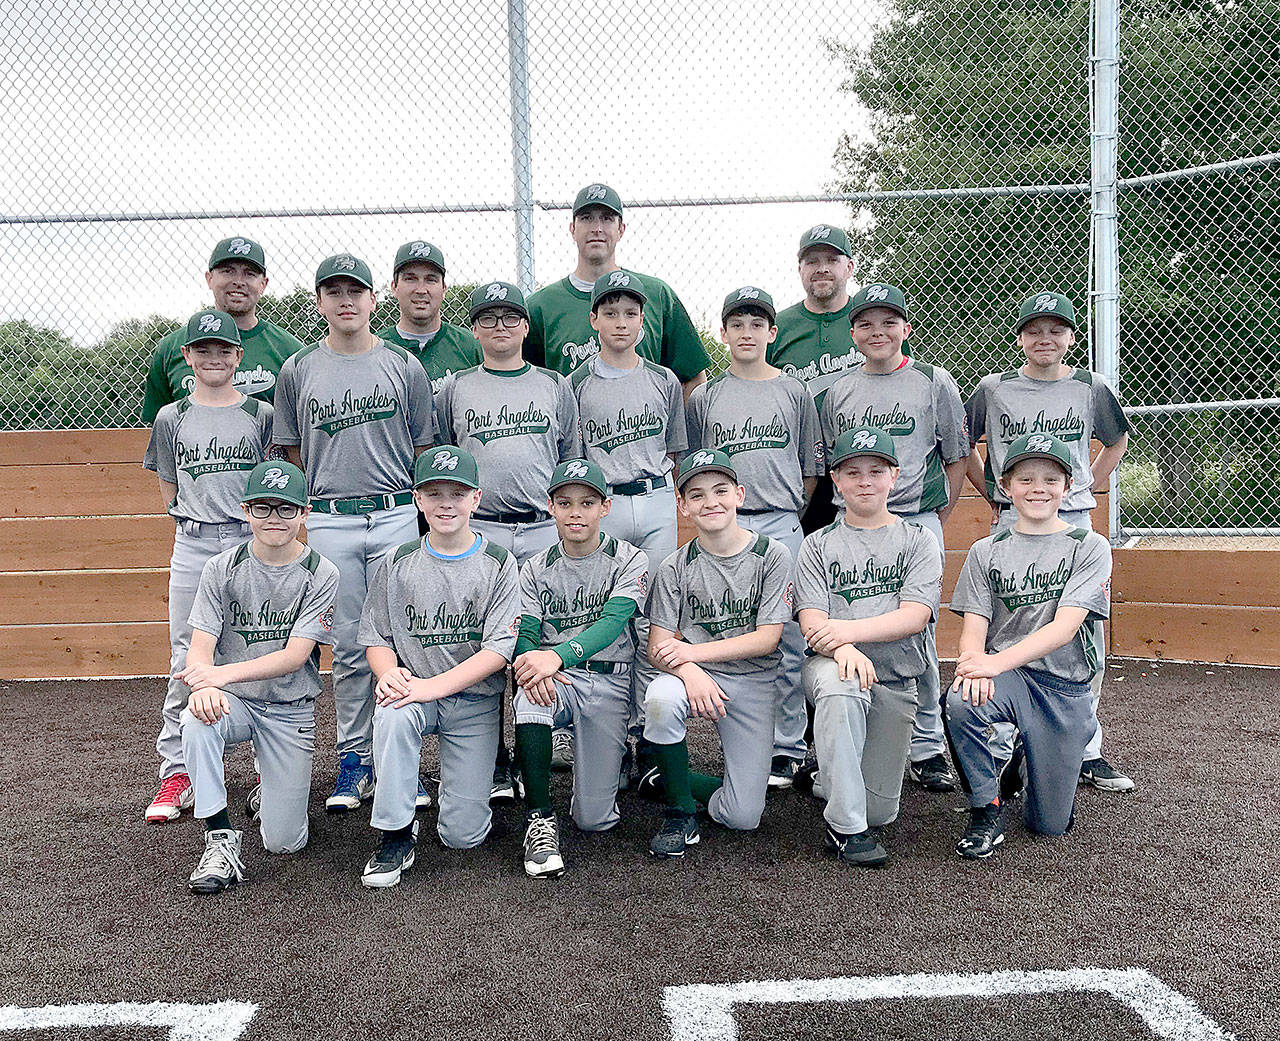 The North Olympic 11U Cal Ripken team, playing in only its second tournament, went 4-0 in pool play this weekend at the North Washington State Tournament in Eastmont, going to the tournament’s championship game, which they lost to Whatcom. The team is, back row, from left, Jason Gooding, Manager Joe Politika, coach Wes Beeman and coach Sean Worthington. Middle row, from left, are Luke Flodstrom, Cole Johnson, Colton Romero, Rylan Politika, Cole Beeman, Brady Rudd and Josiah Gooding. Front row, from left, are Alex Angevine, Austin Worthington, Dereck Stadmeyer, Nathan Basden, Jordan Shumway and Hunter Stratford.